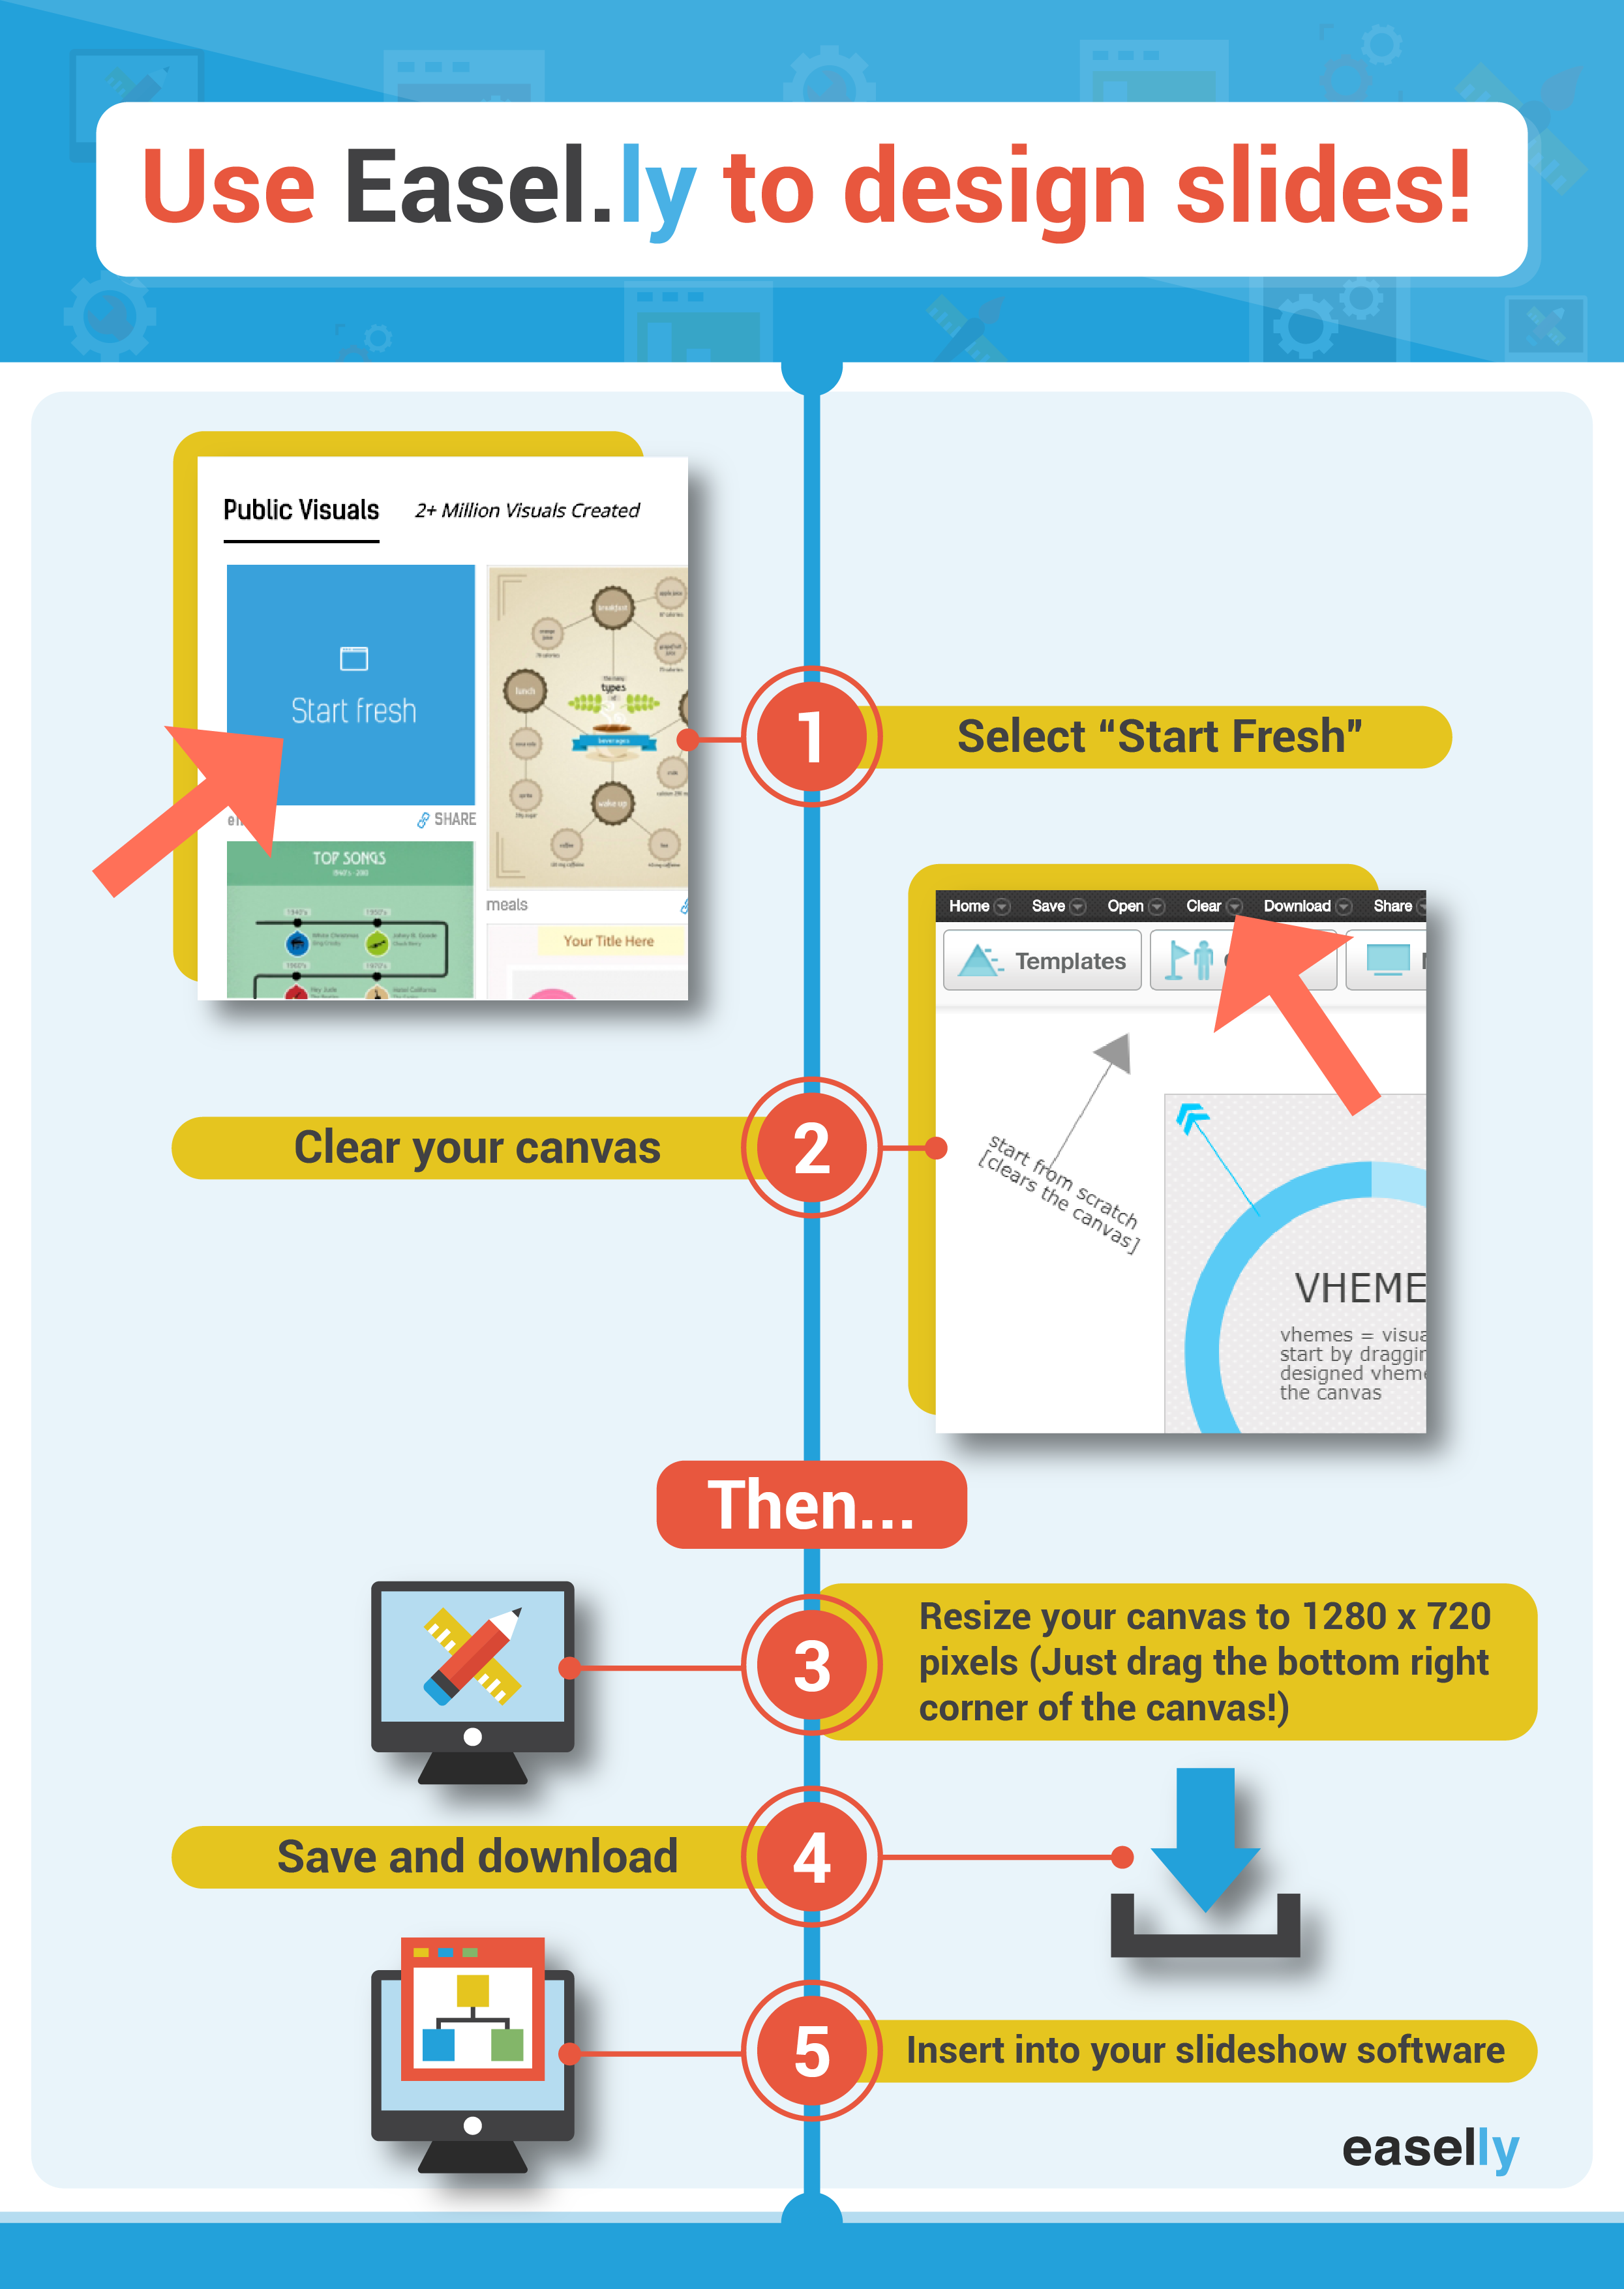 Make Slides Easelly Simple Infographic Maker Tool By Easelly 0176